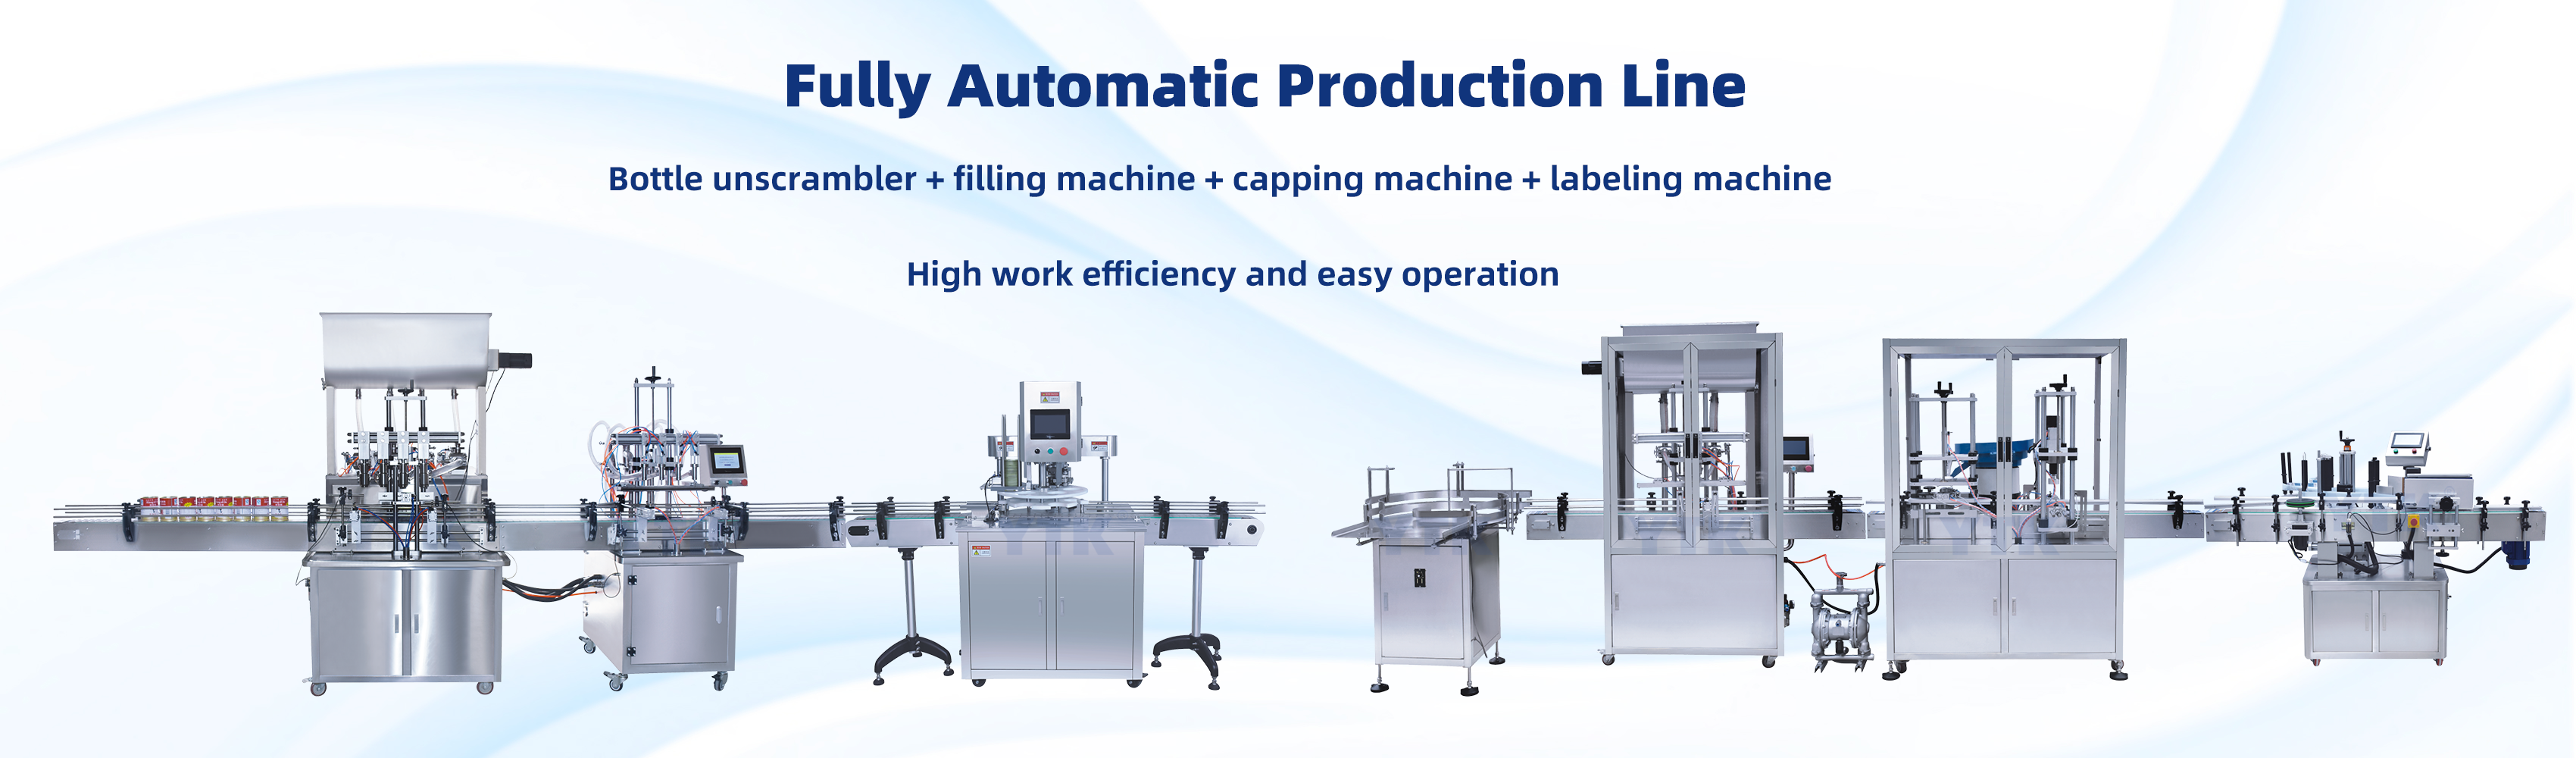 Factory of Automatic Filling Machine and Labeling Machine